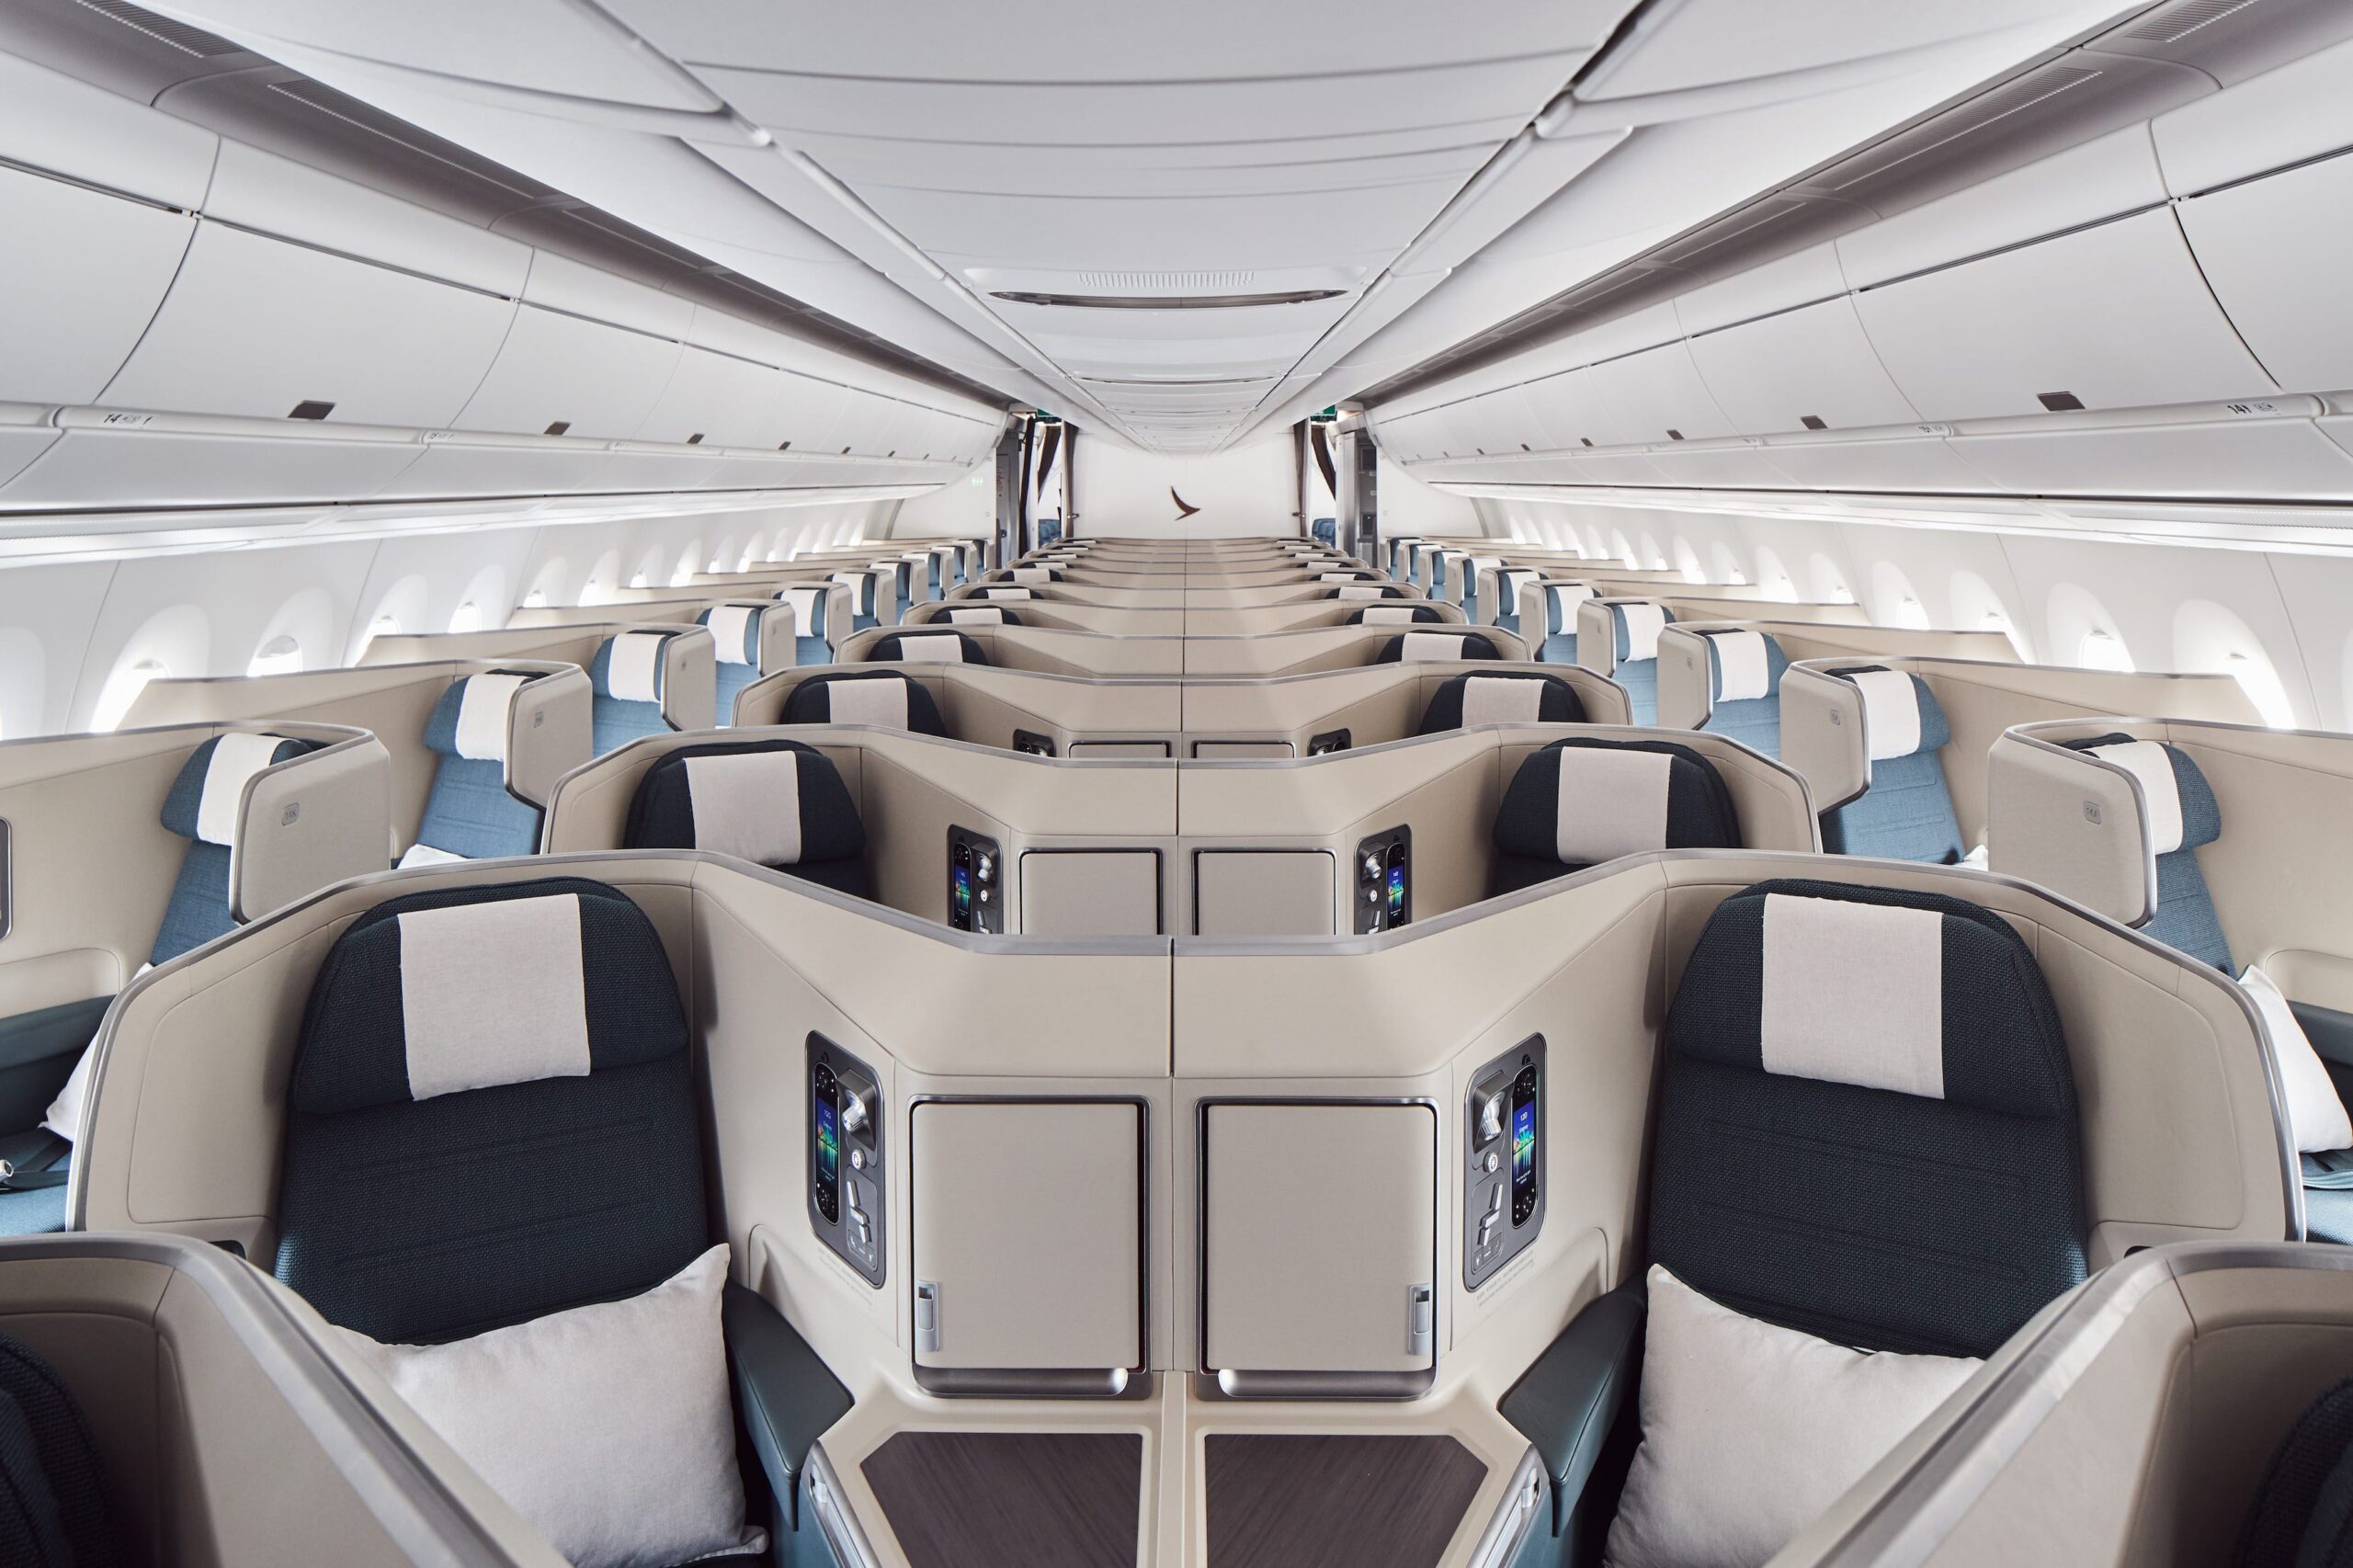 Business class on a Cathay Pacific Airbus A350